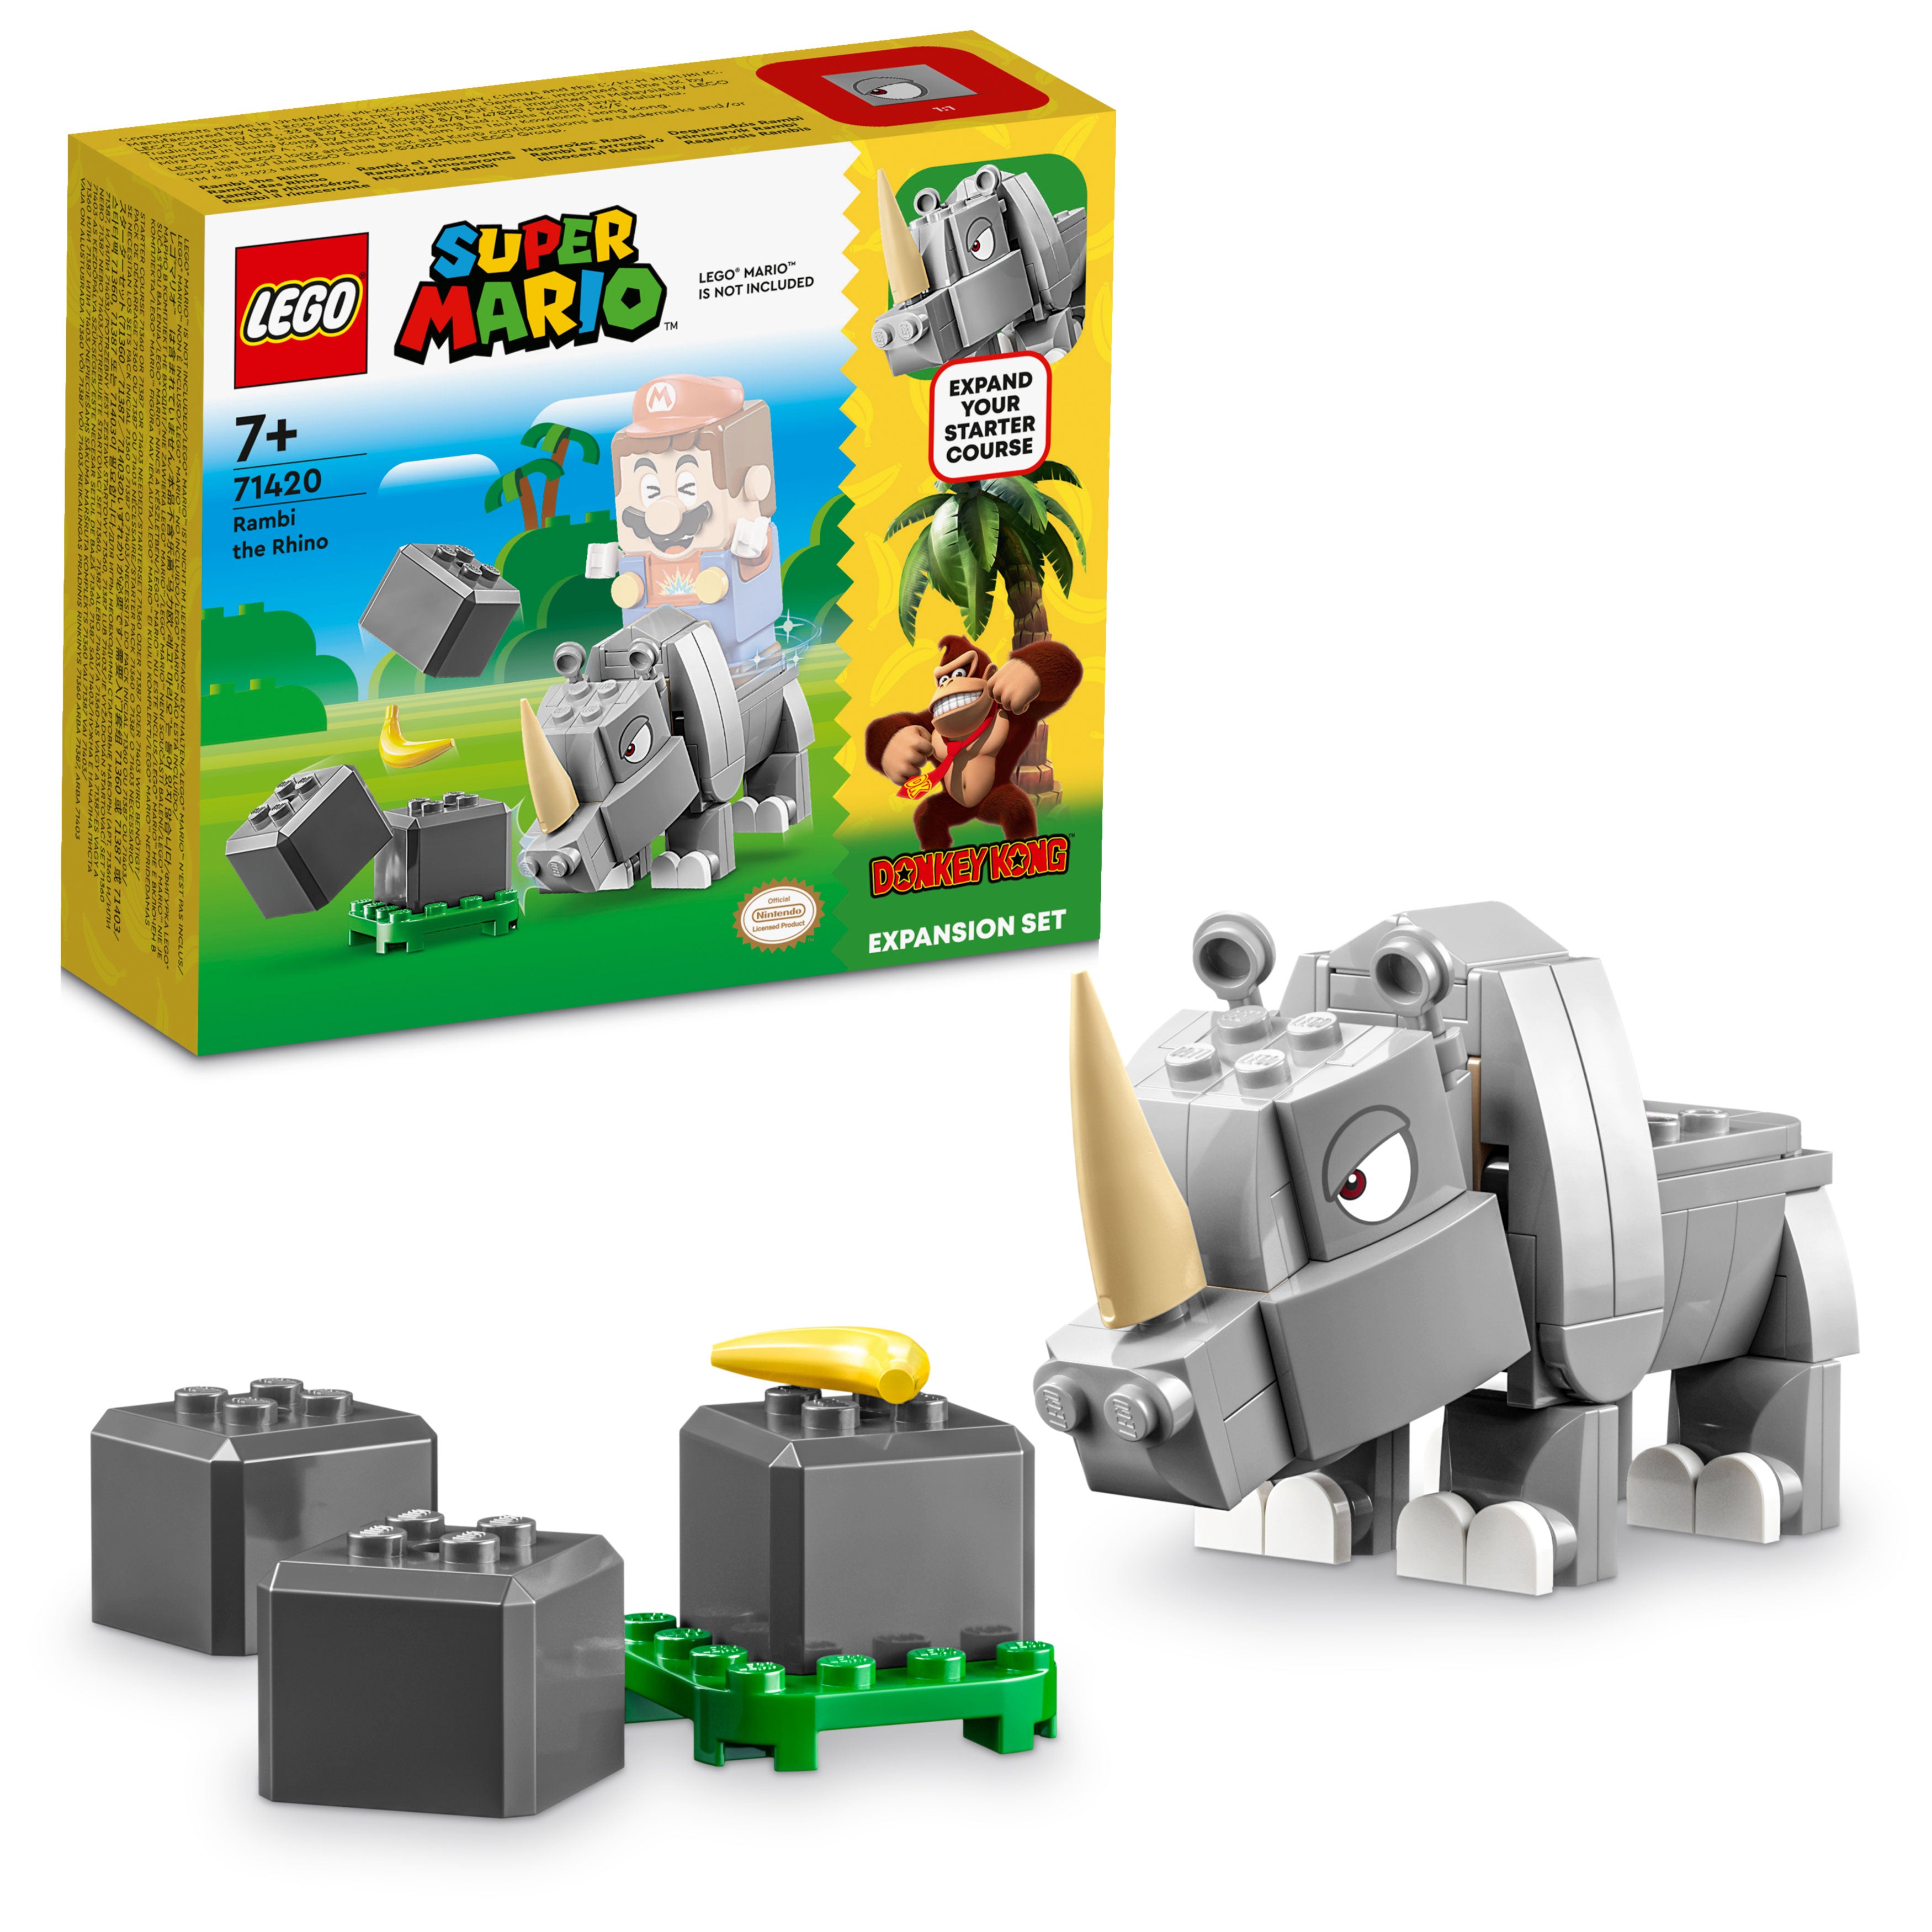 Lego 71420 Rambi the Rhino Expansion Pack